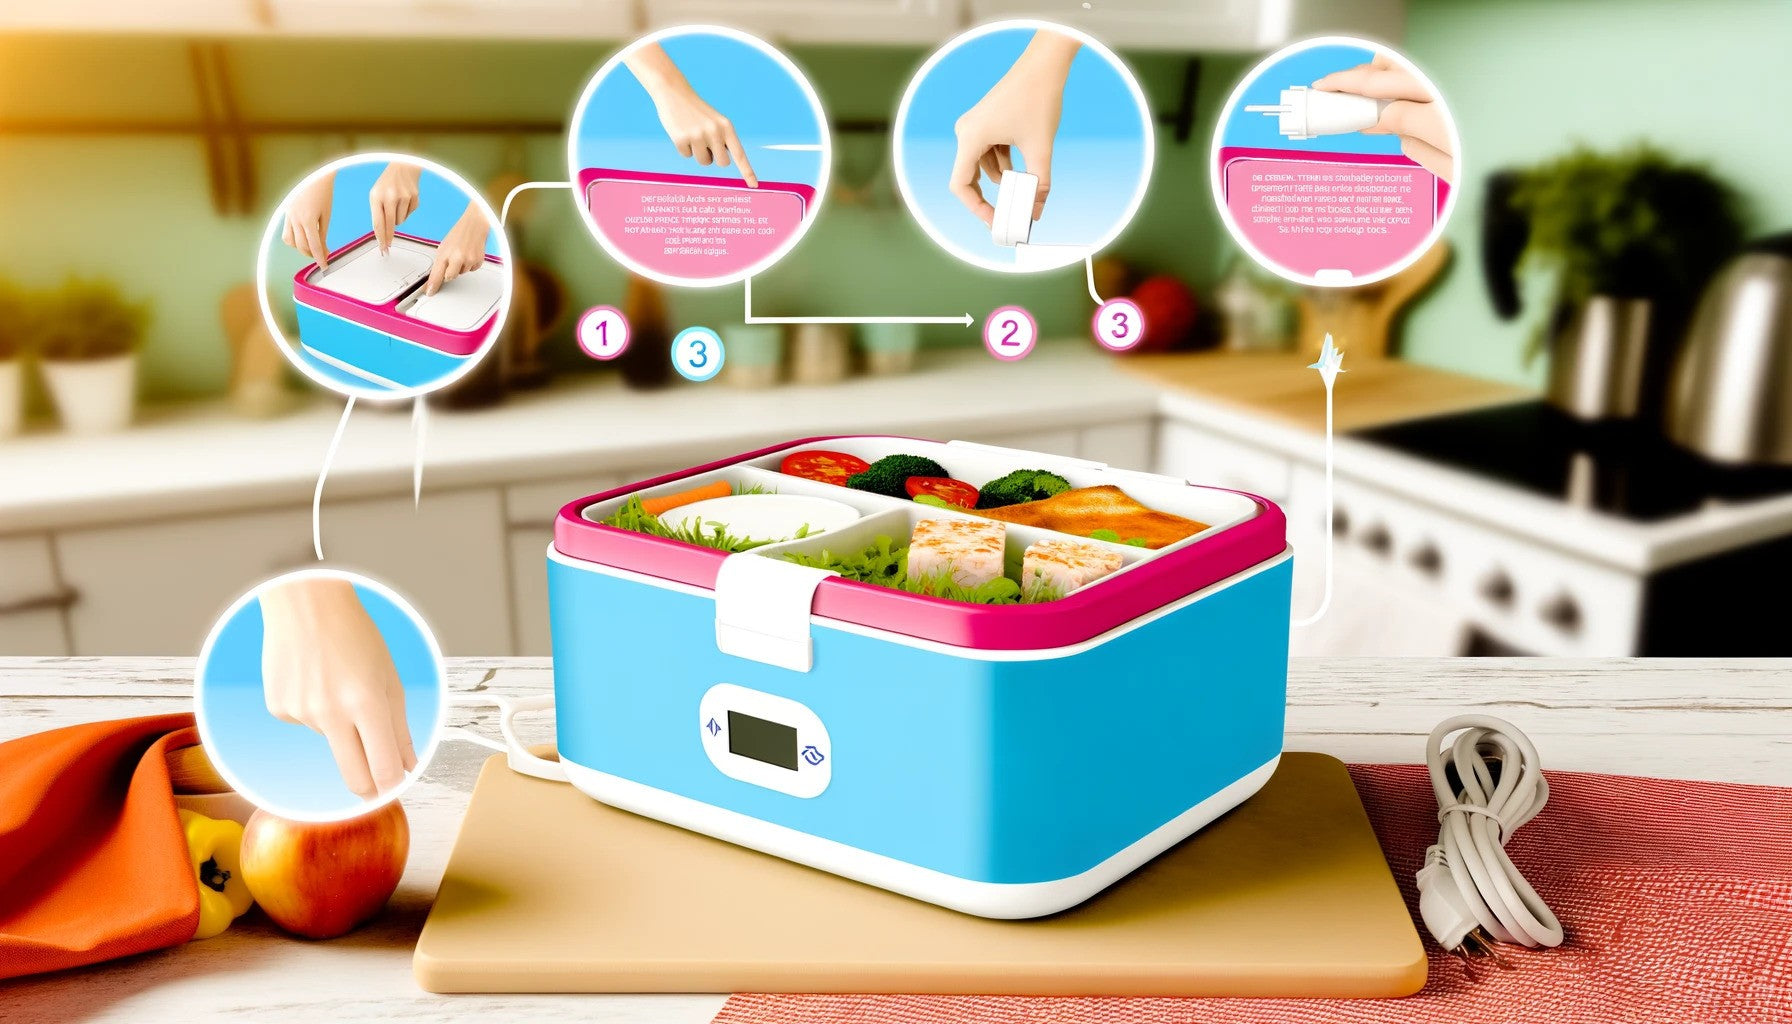 How to Use Electric Lunch Box? Love gadgets